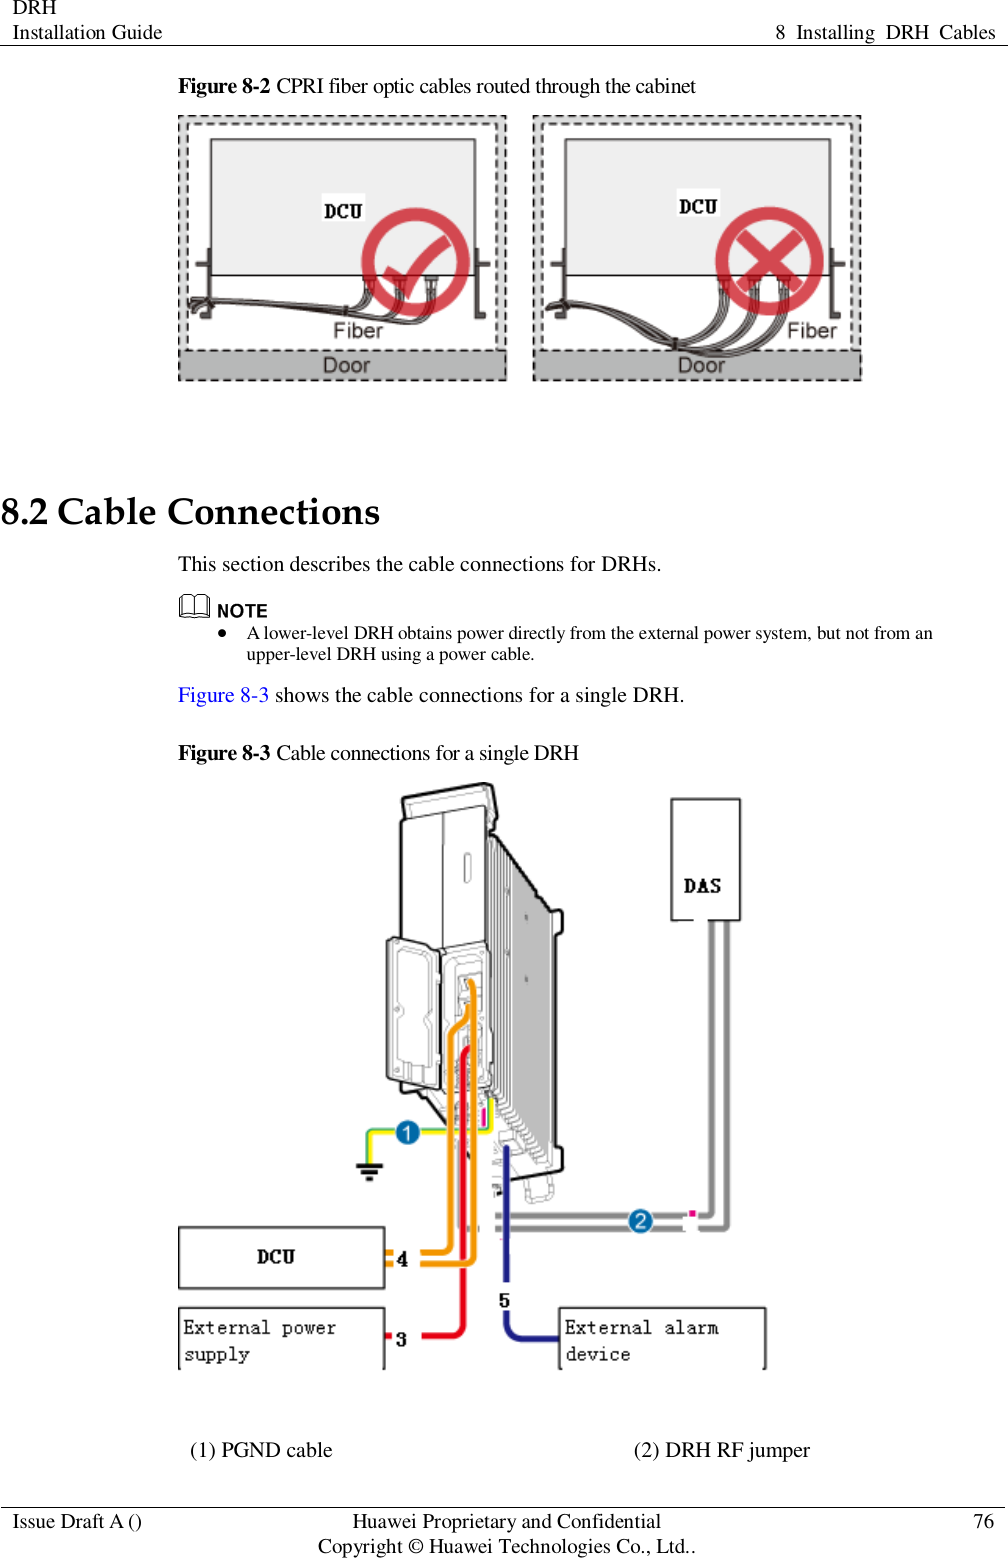 DRH   Installation Guide 8  Installing  DRH  Cables  Issue Draft A () Huawei Proprietary and Confidential                                     Copyright © Huawei Technologies Co., Ltd.. 76  Figure 8-2 CPRI fiber optic cables routed through the cabinet    8.2 Cable Connections This section describes the cable connections for DRHs.   A lower-level DRH obtains power directly from the external power system, but not from an upper-level DRH using a power cable. Figure 8-3 shows the cable connections for a single DRH. Figure 8-3 Cable connections for a single DRH  (1) PGND cable (2) DRH RF jumper  